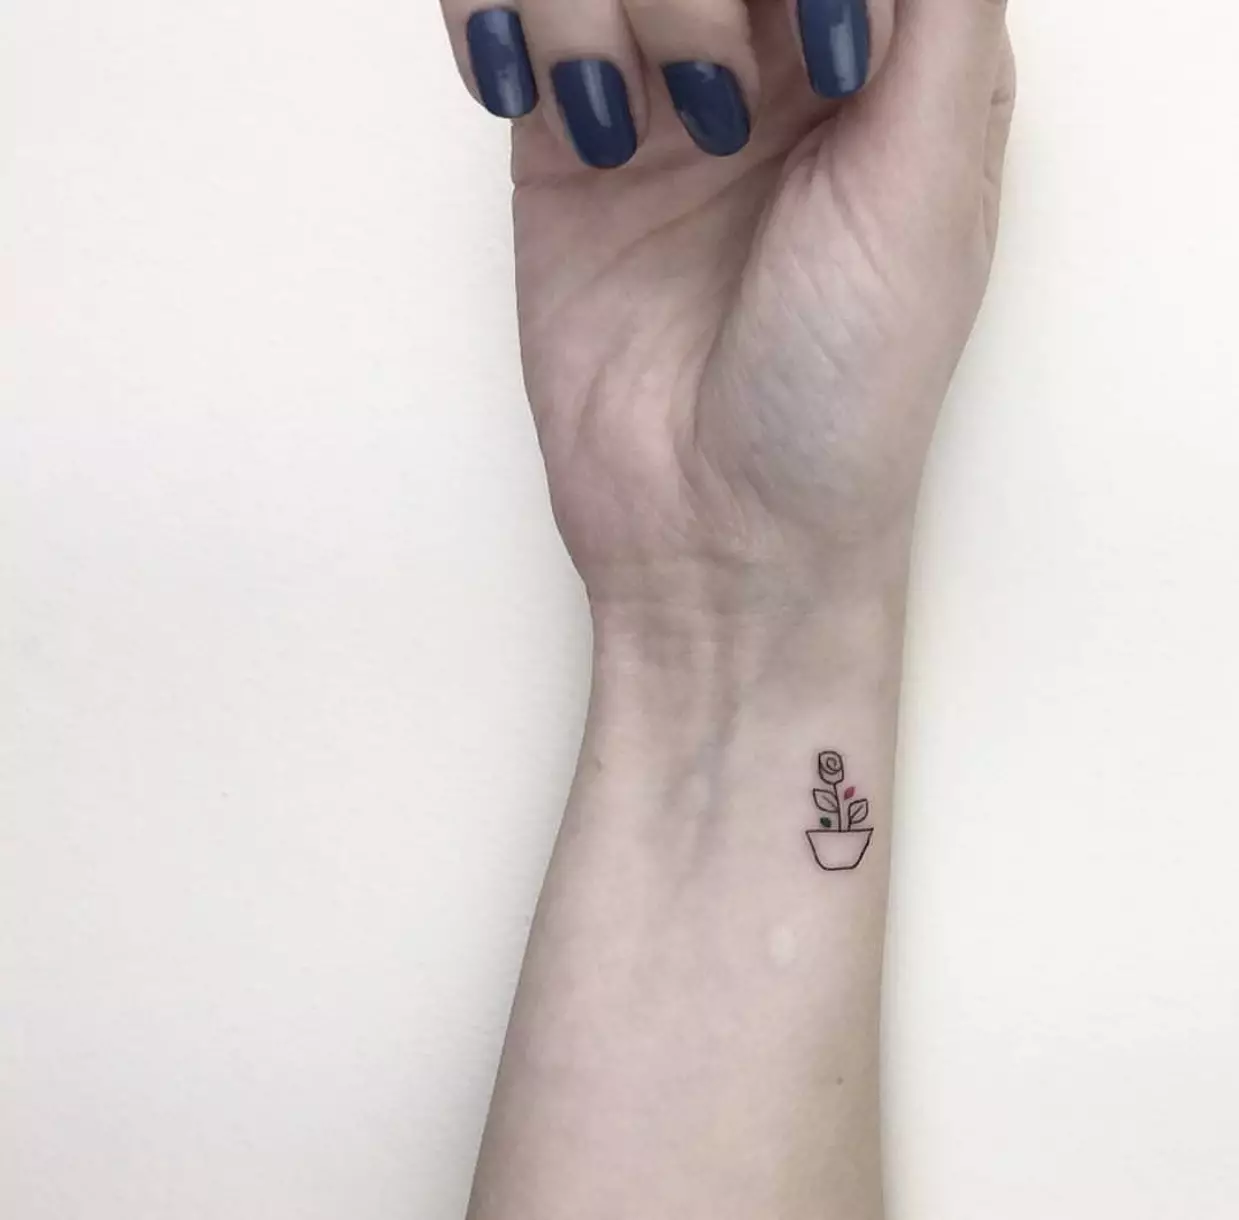 Tattoo for girls on the wrist (80 photos): Little tattoo with meaning and other, sketches and meanings, beautiful tattoos around the wrist and side 13834_49